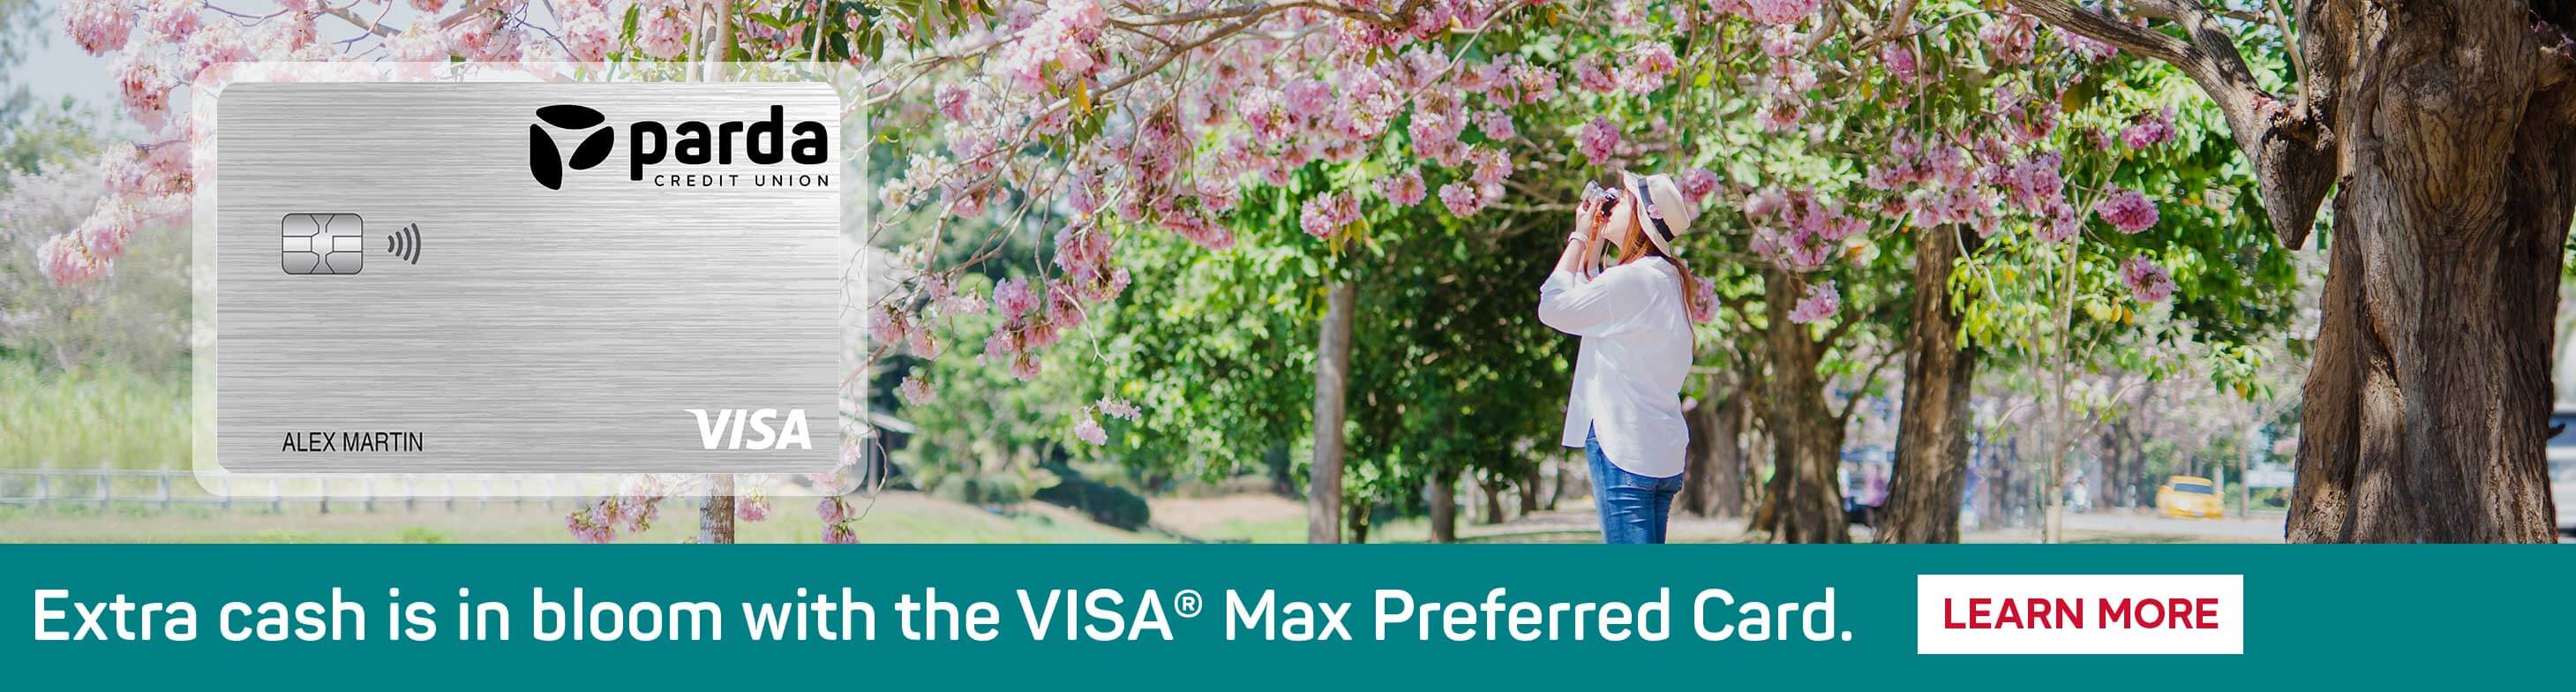 Extra cash is in bloom with the VISAÃ‚Â® Max Preferred Card.